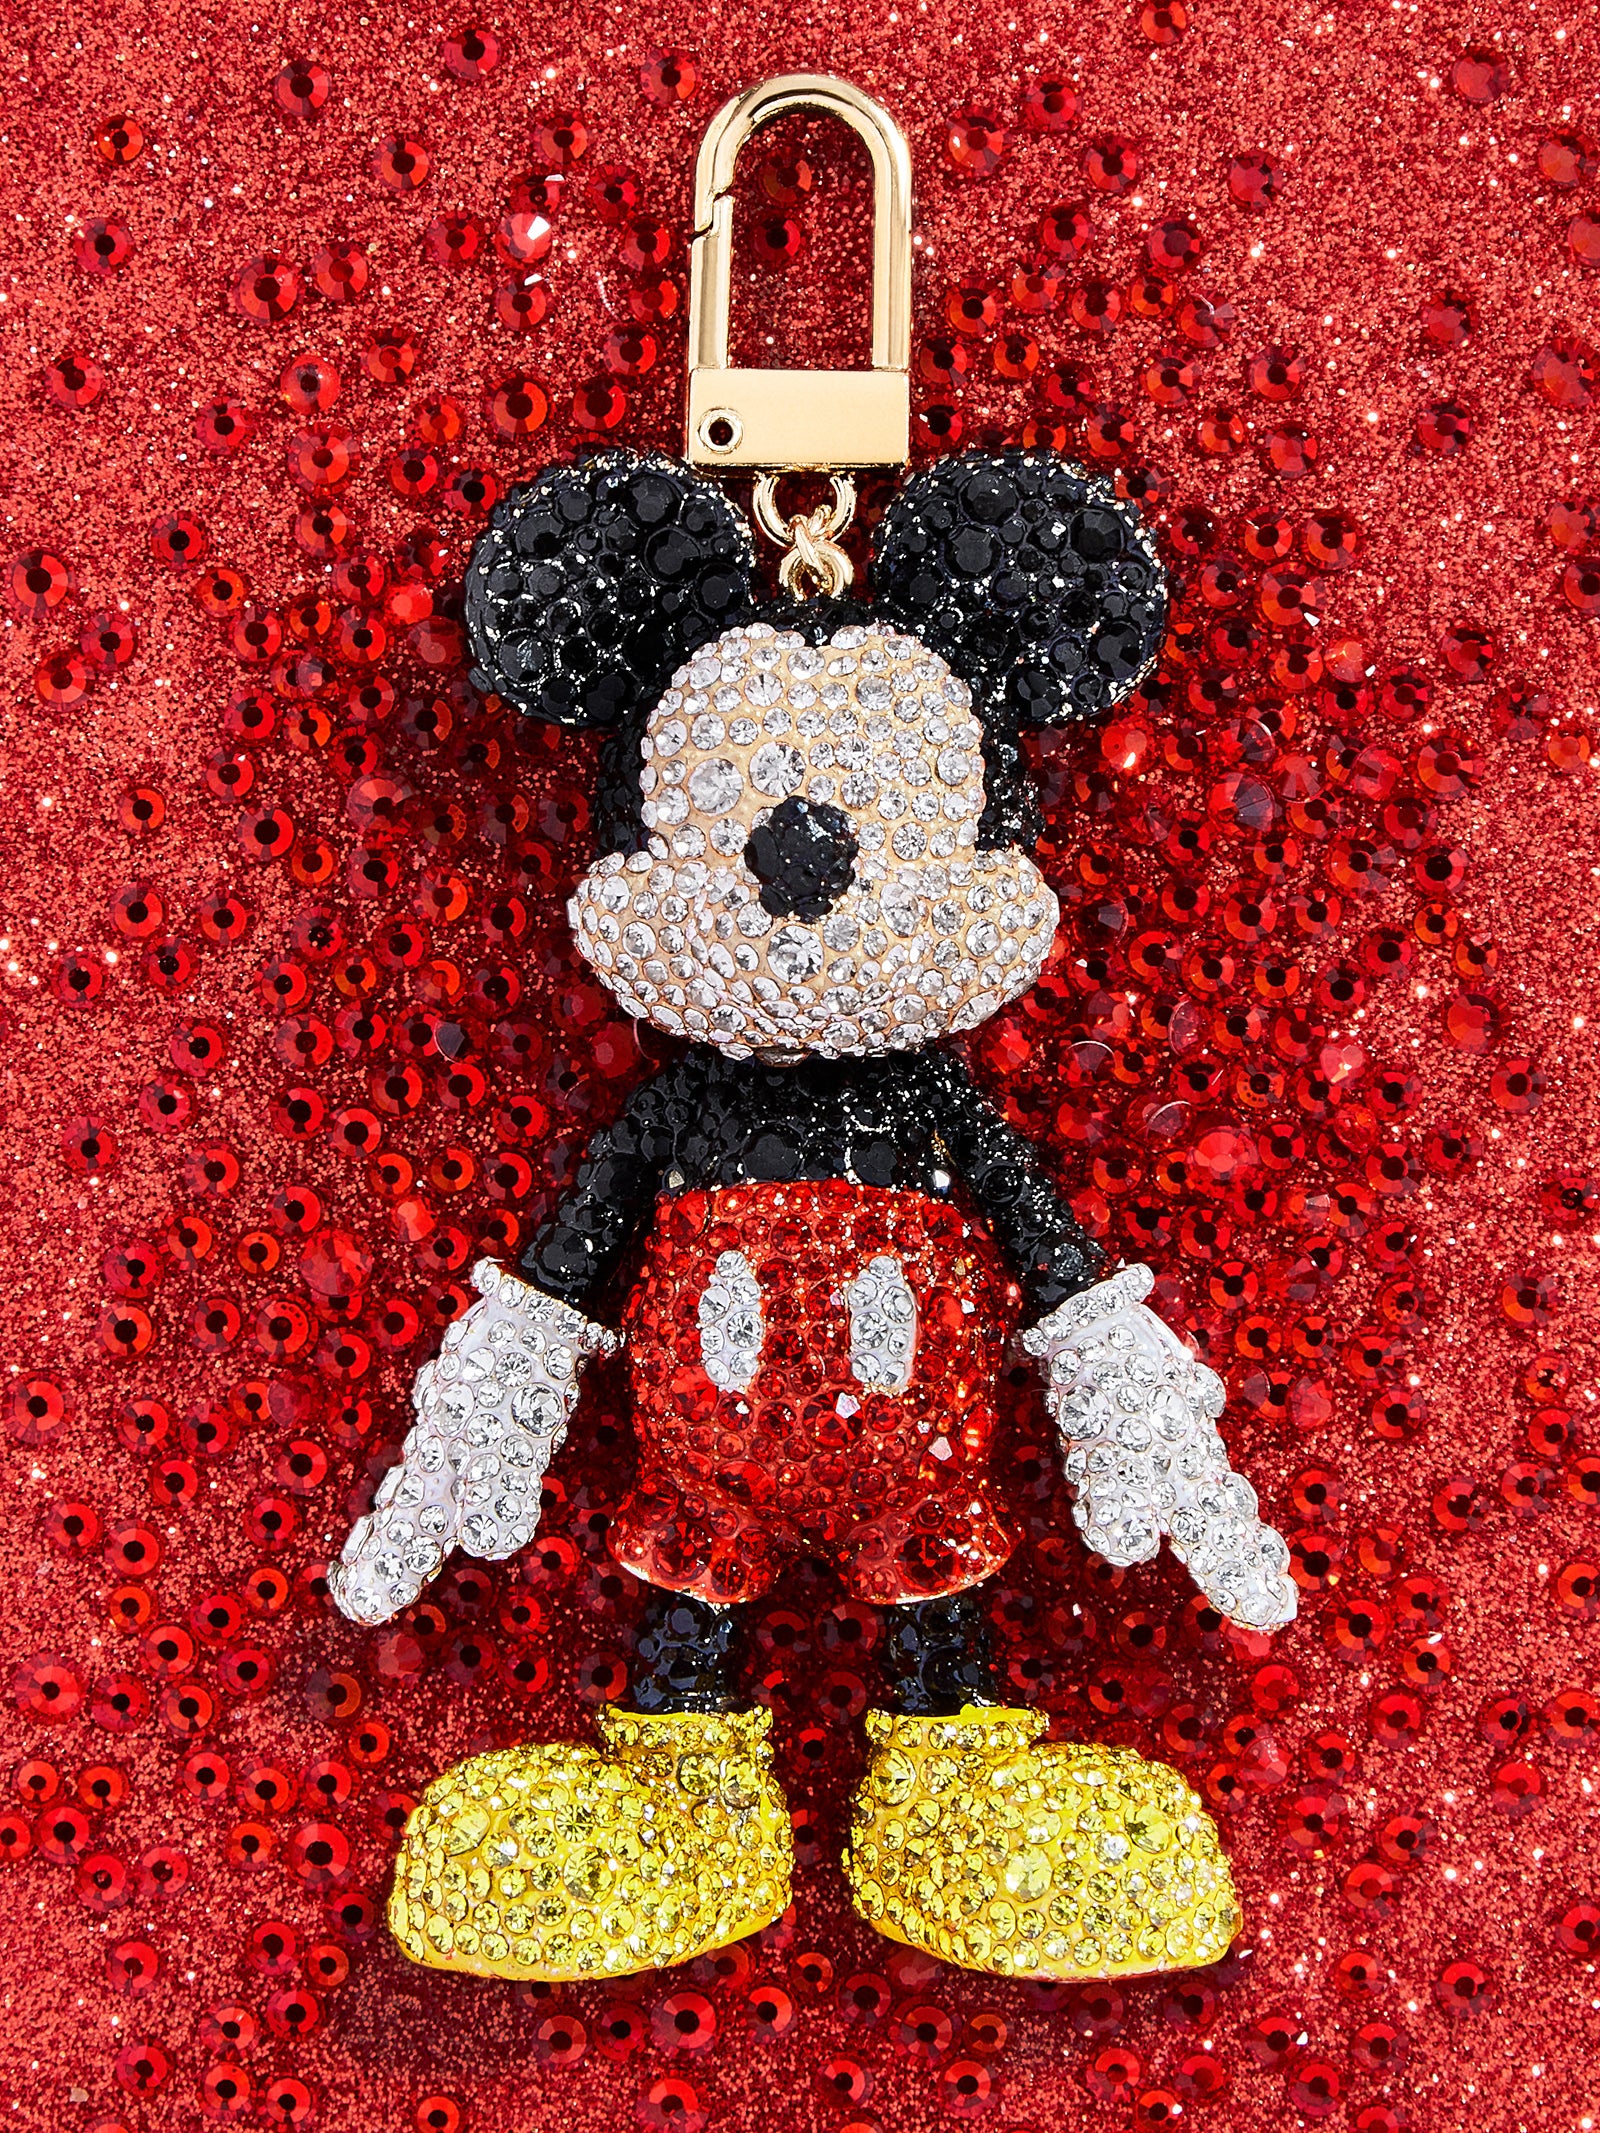 Buy Disney100 Mickey Mouse Classic Tassle Bag Charm at Loungefly.